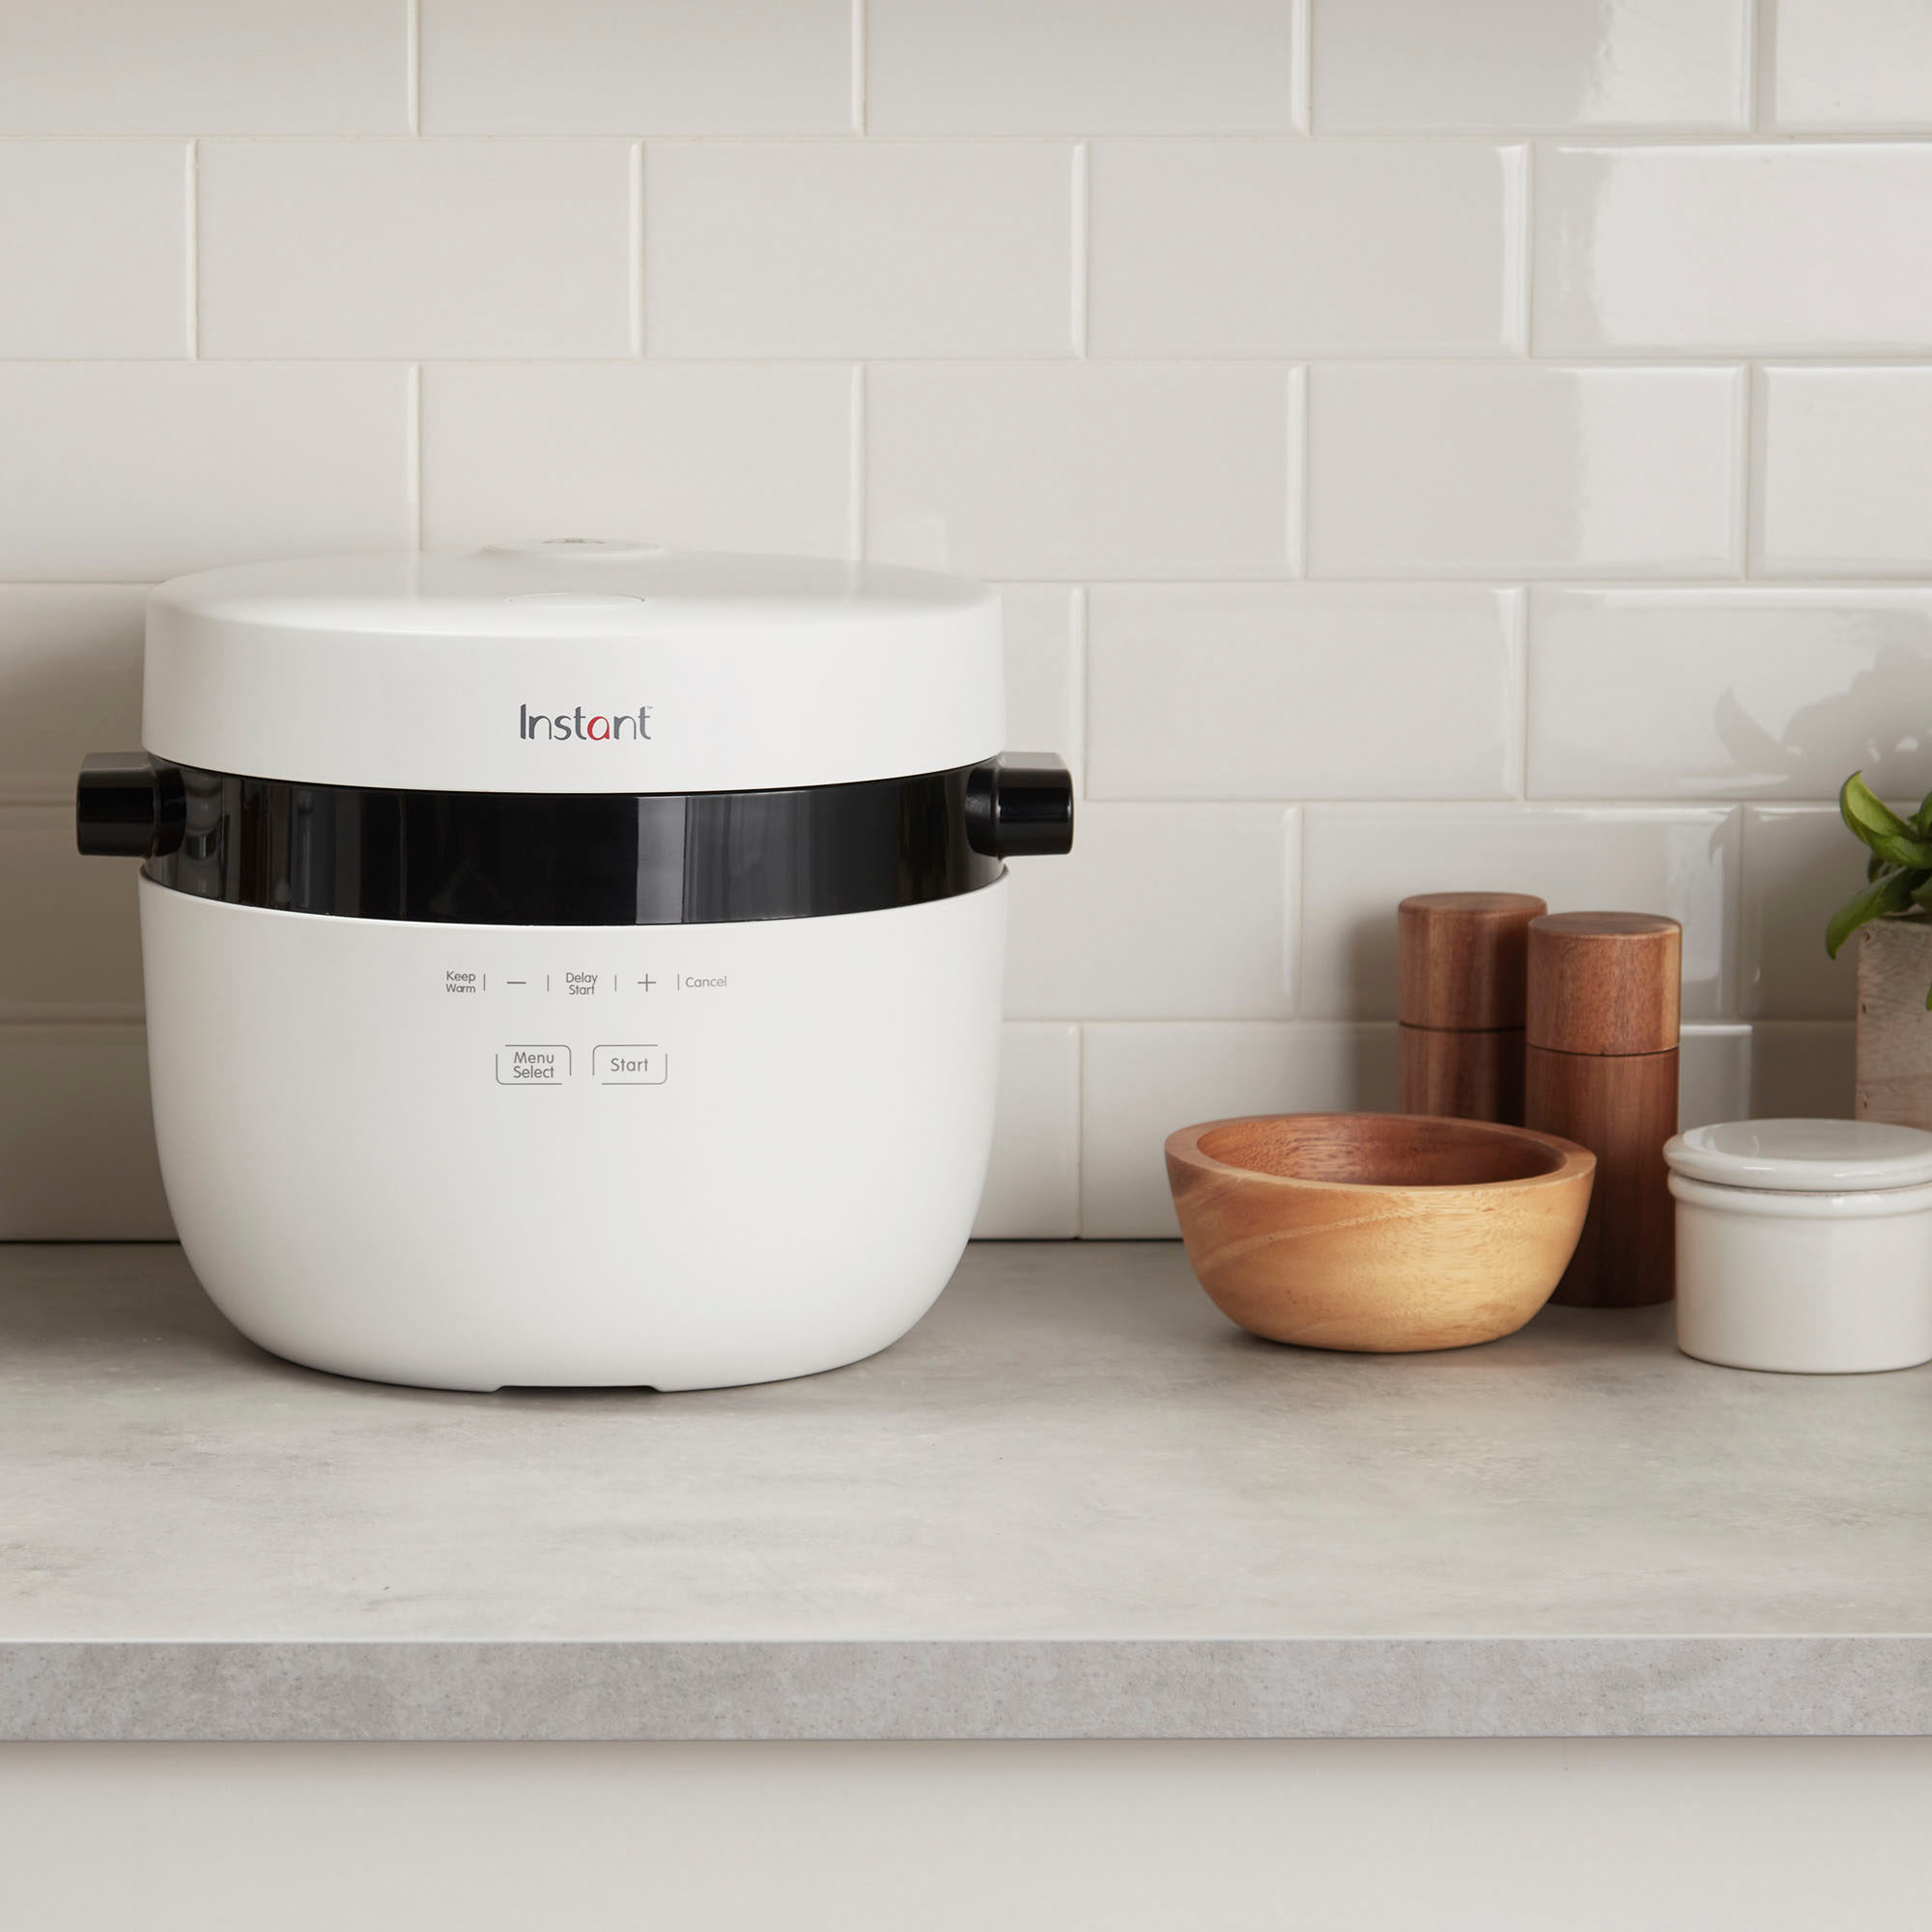 Are Instant Brands rice cookers dishwasher safe?